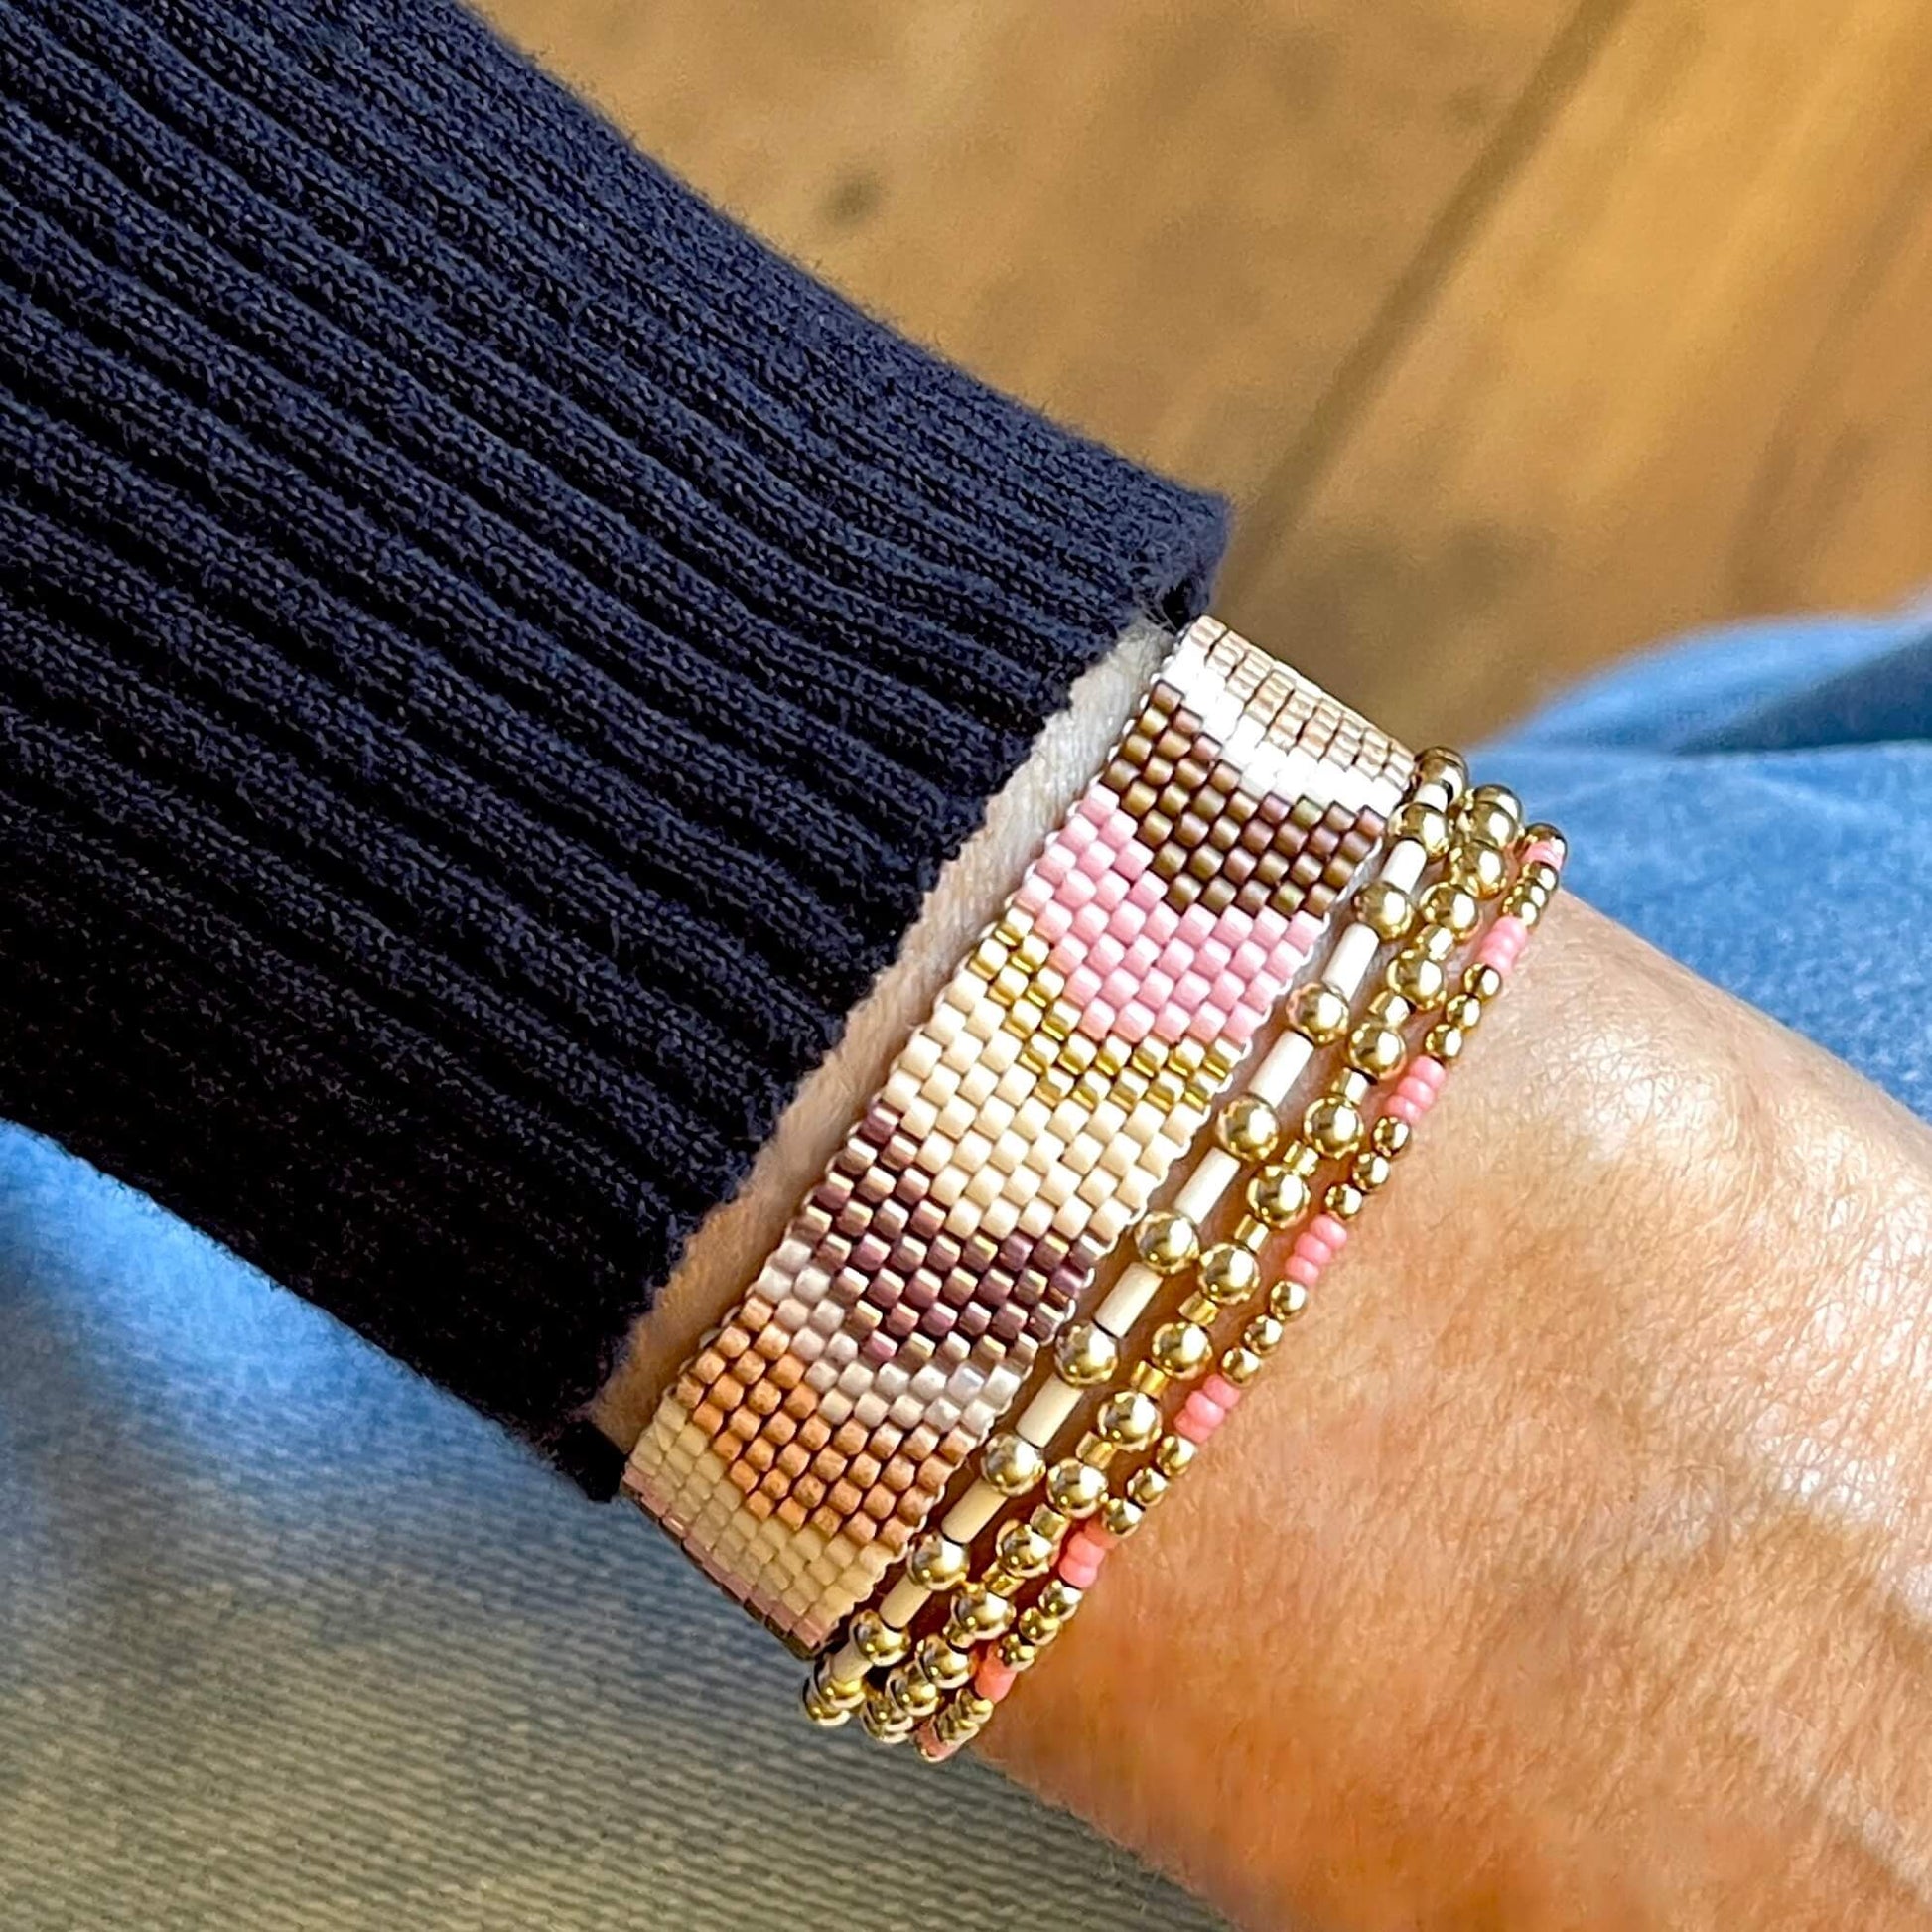 Chevron bracelet with pink, white, and gold seed beads and 3 gold ball stretch bracelets with 14K gold filled beads.